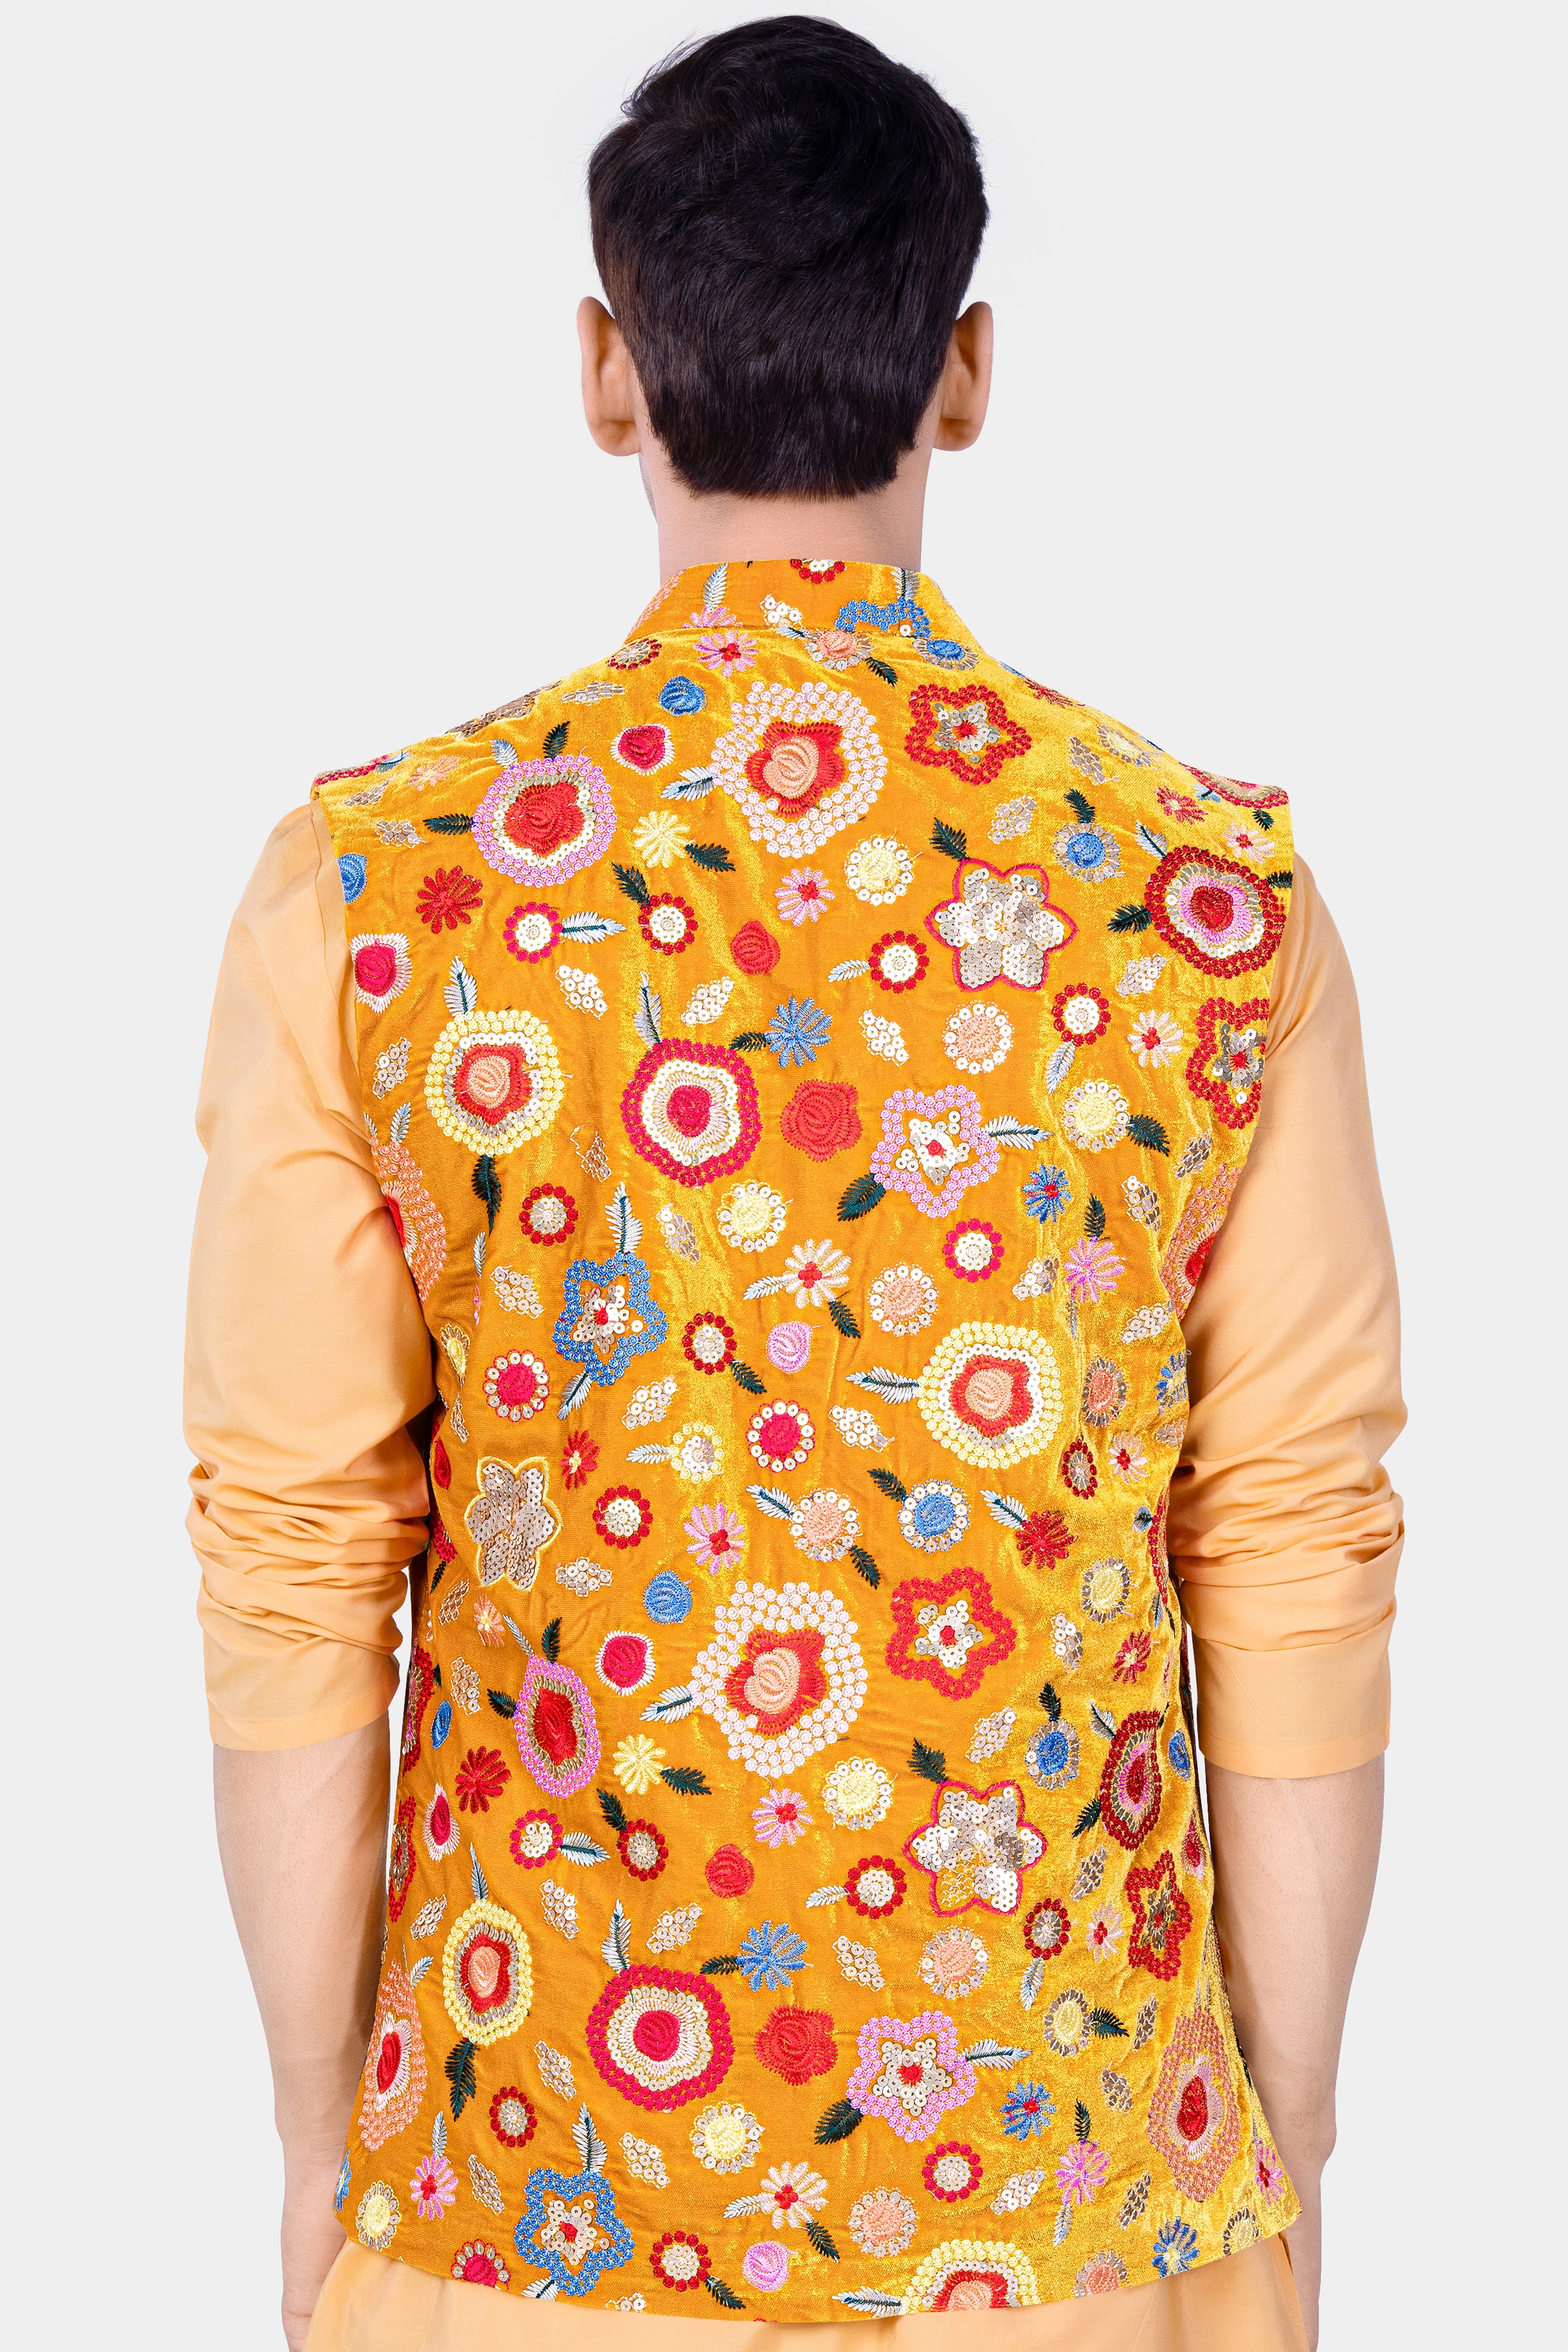 Tangerine Yellow And Alizarin Red Velvet Floral Thread Embroidered Nehru Jacket